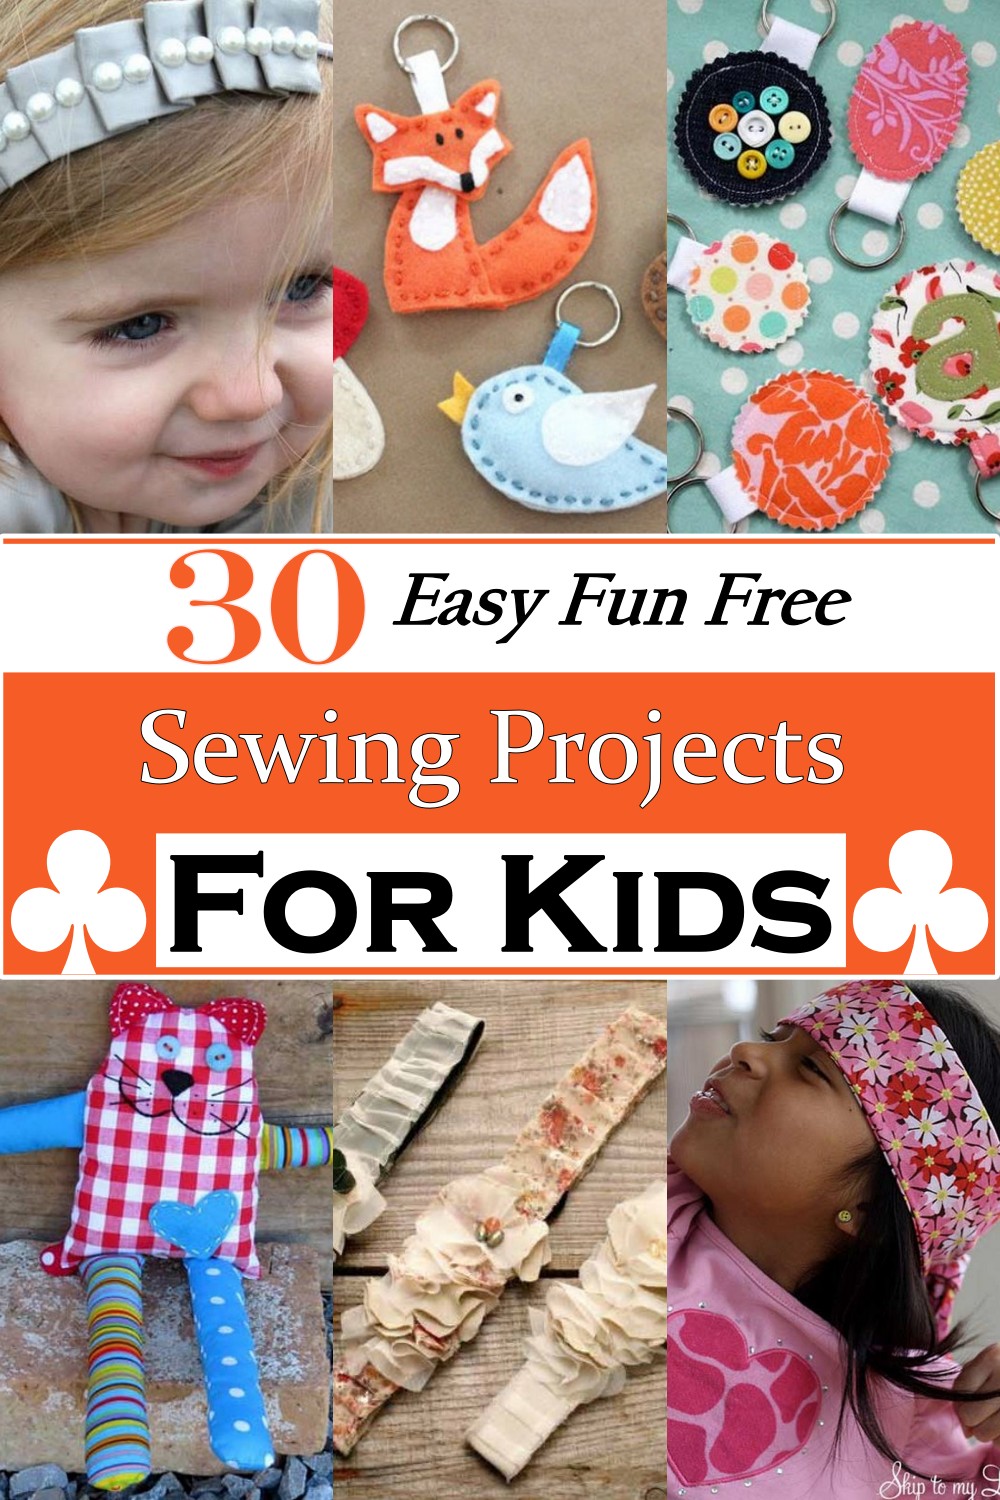 Easy Fun Free Sewing Projects For Kids 1